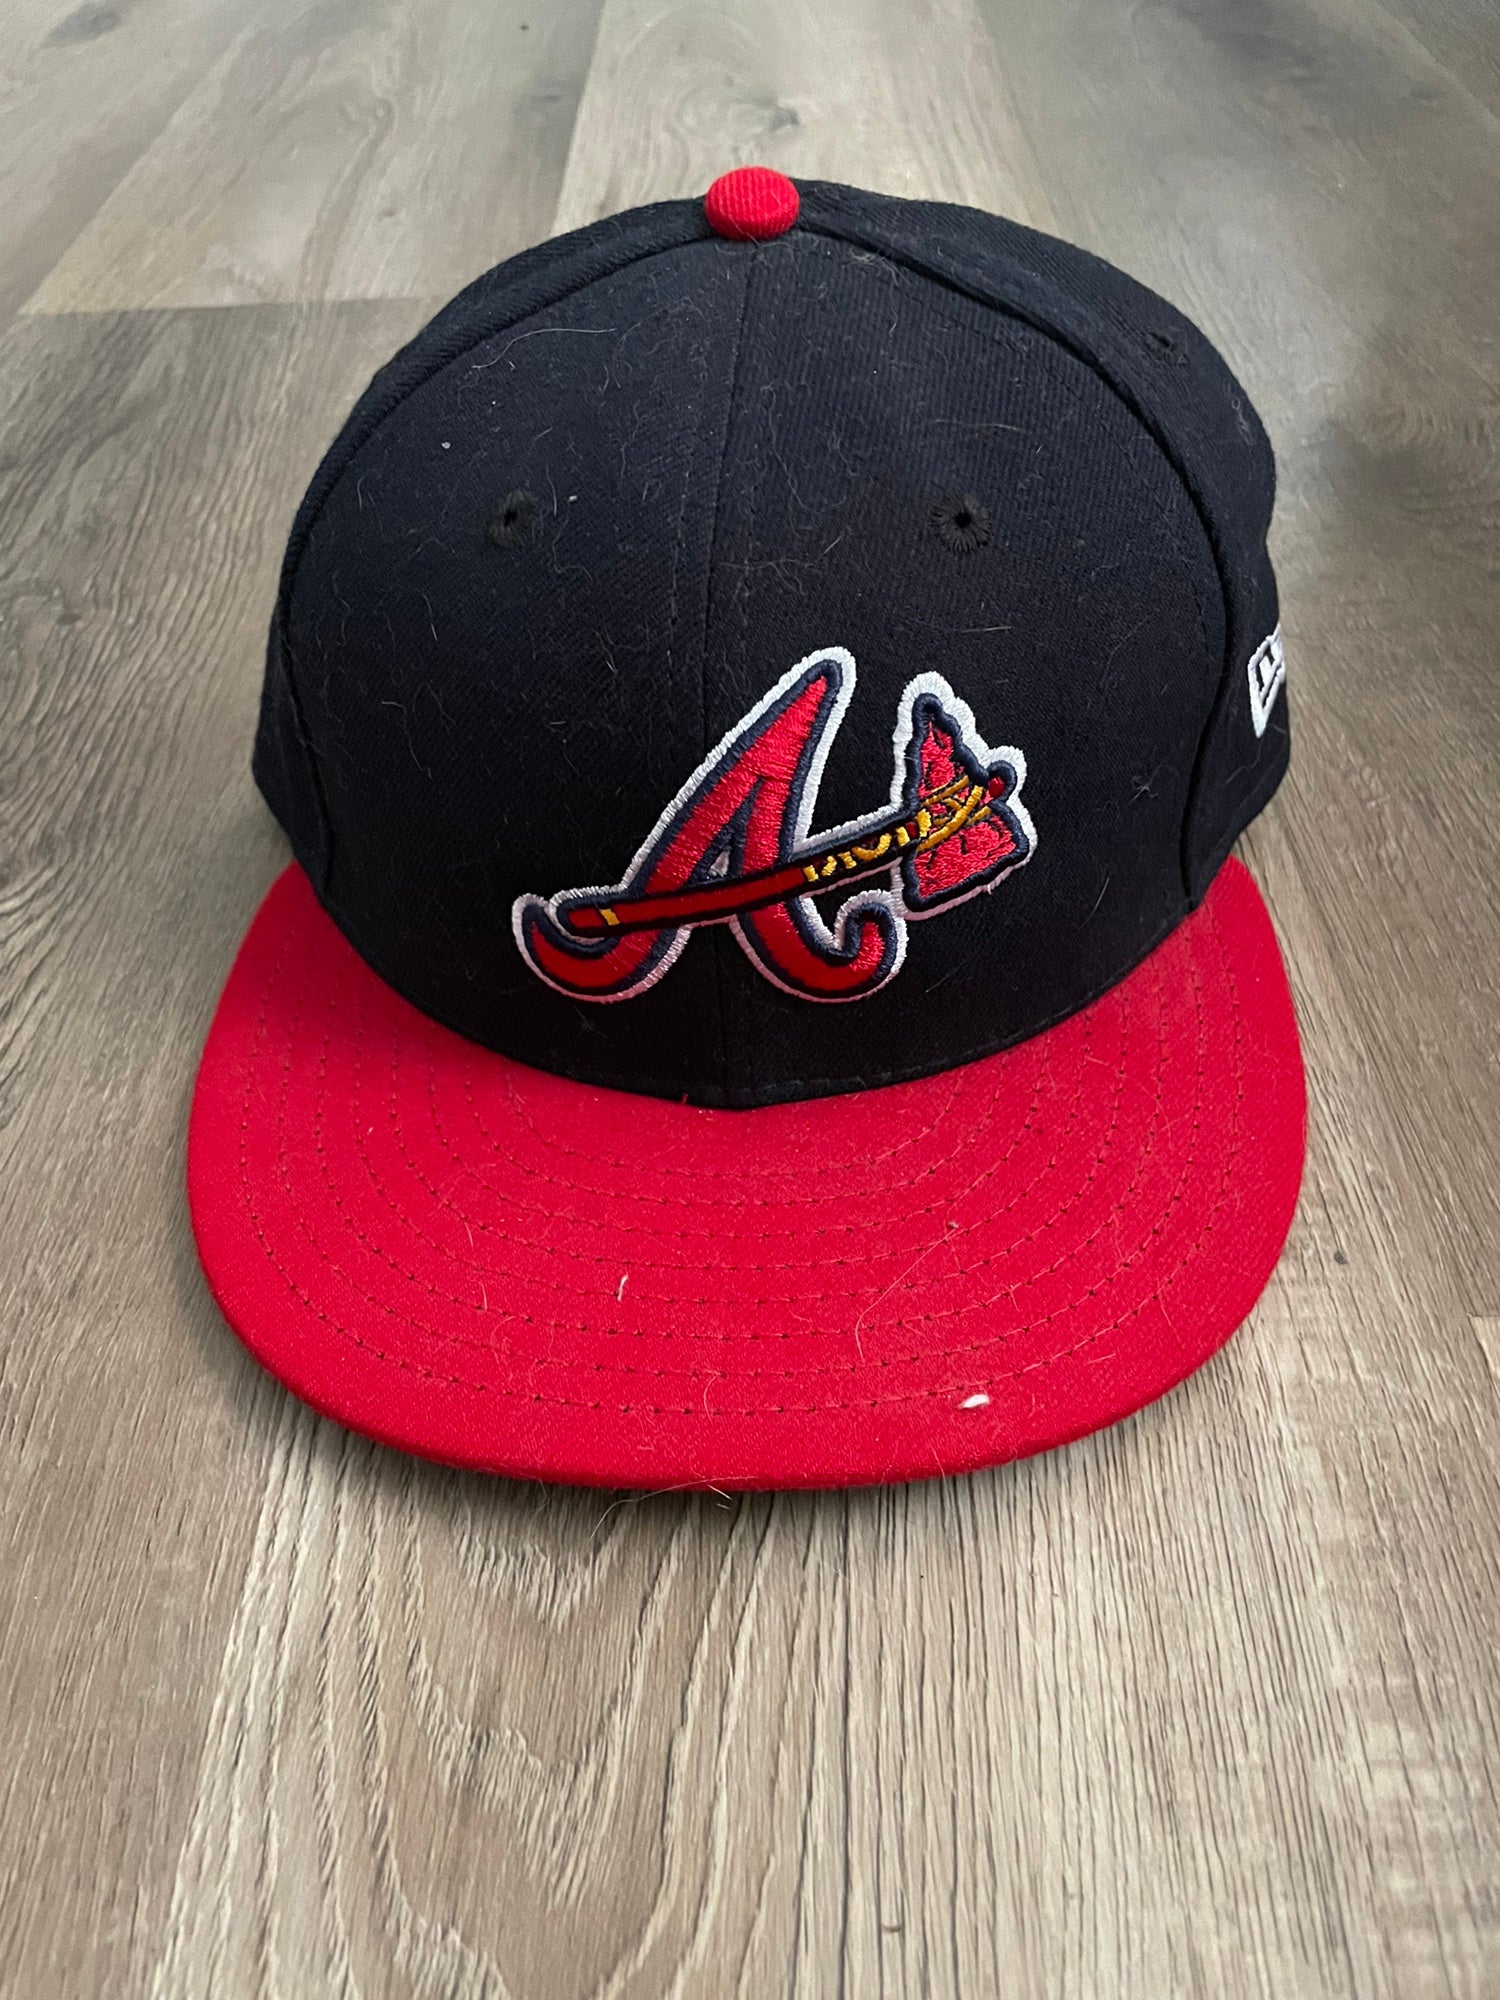 Atlanta Braves A-TOOTH White-Black Fitted Hat by New Era